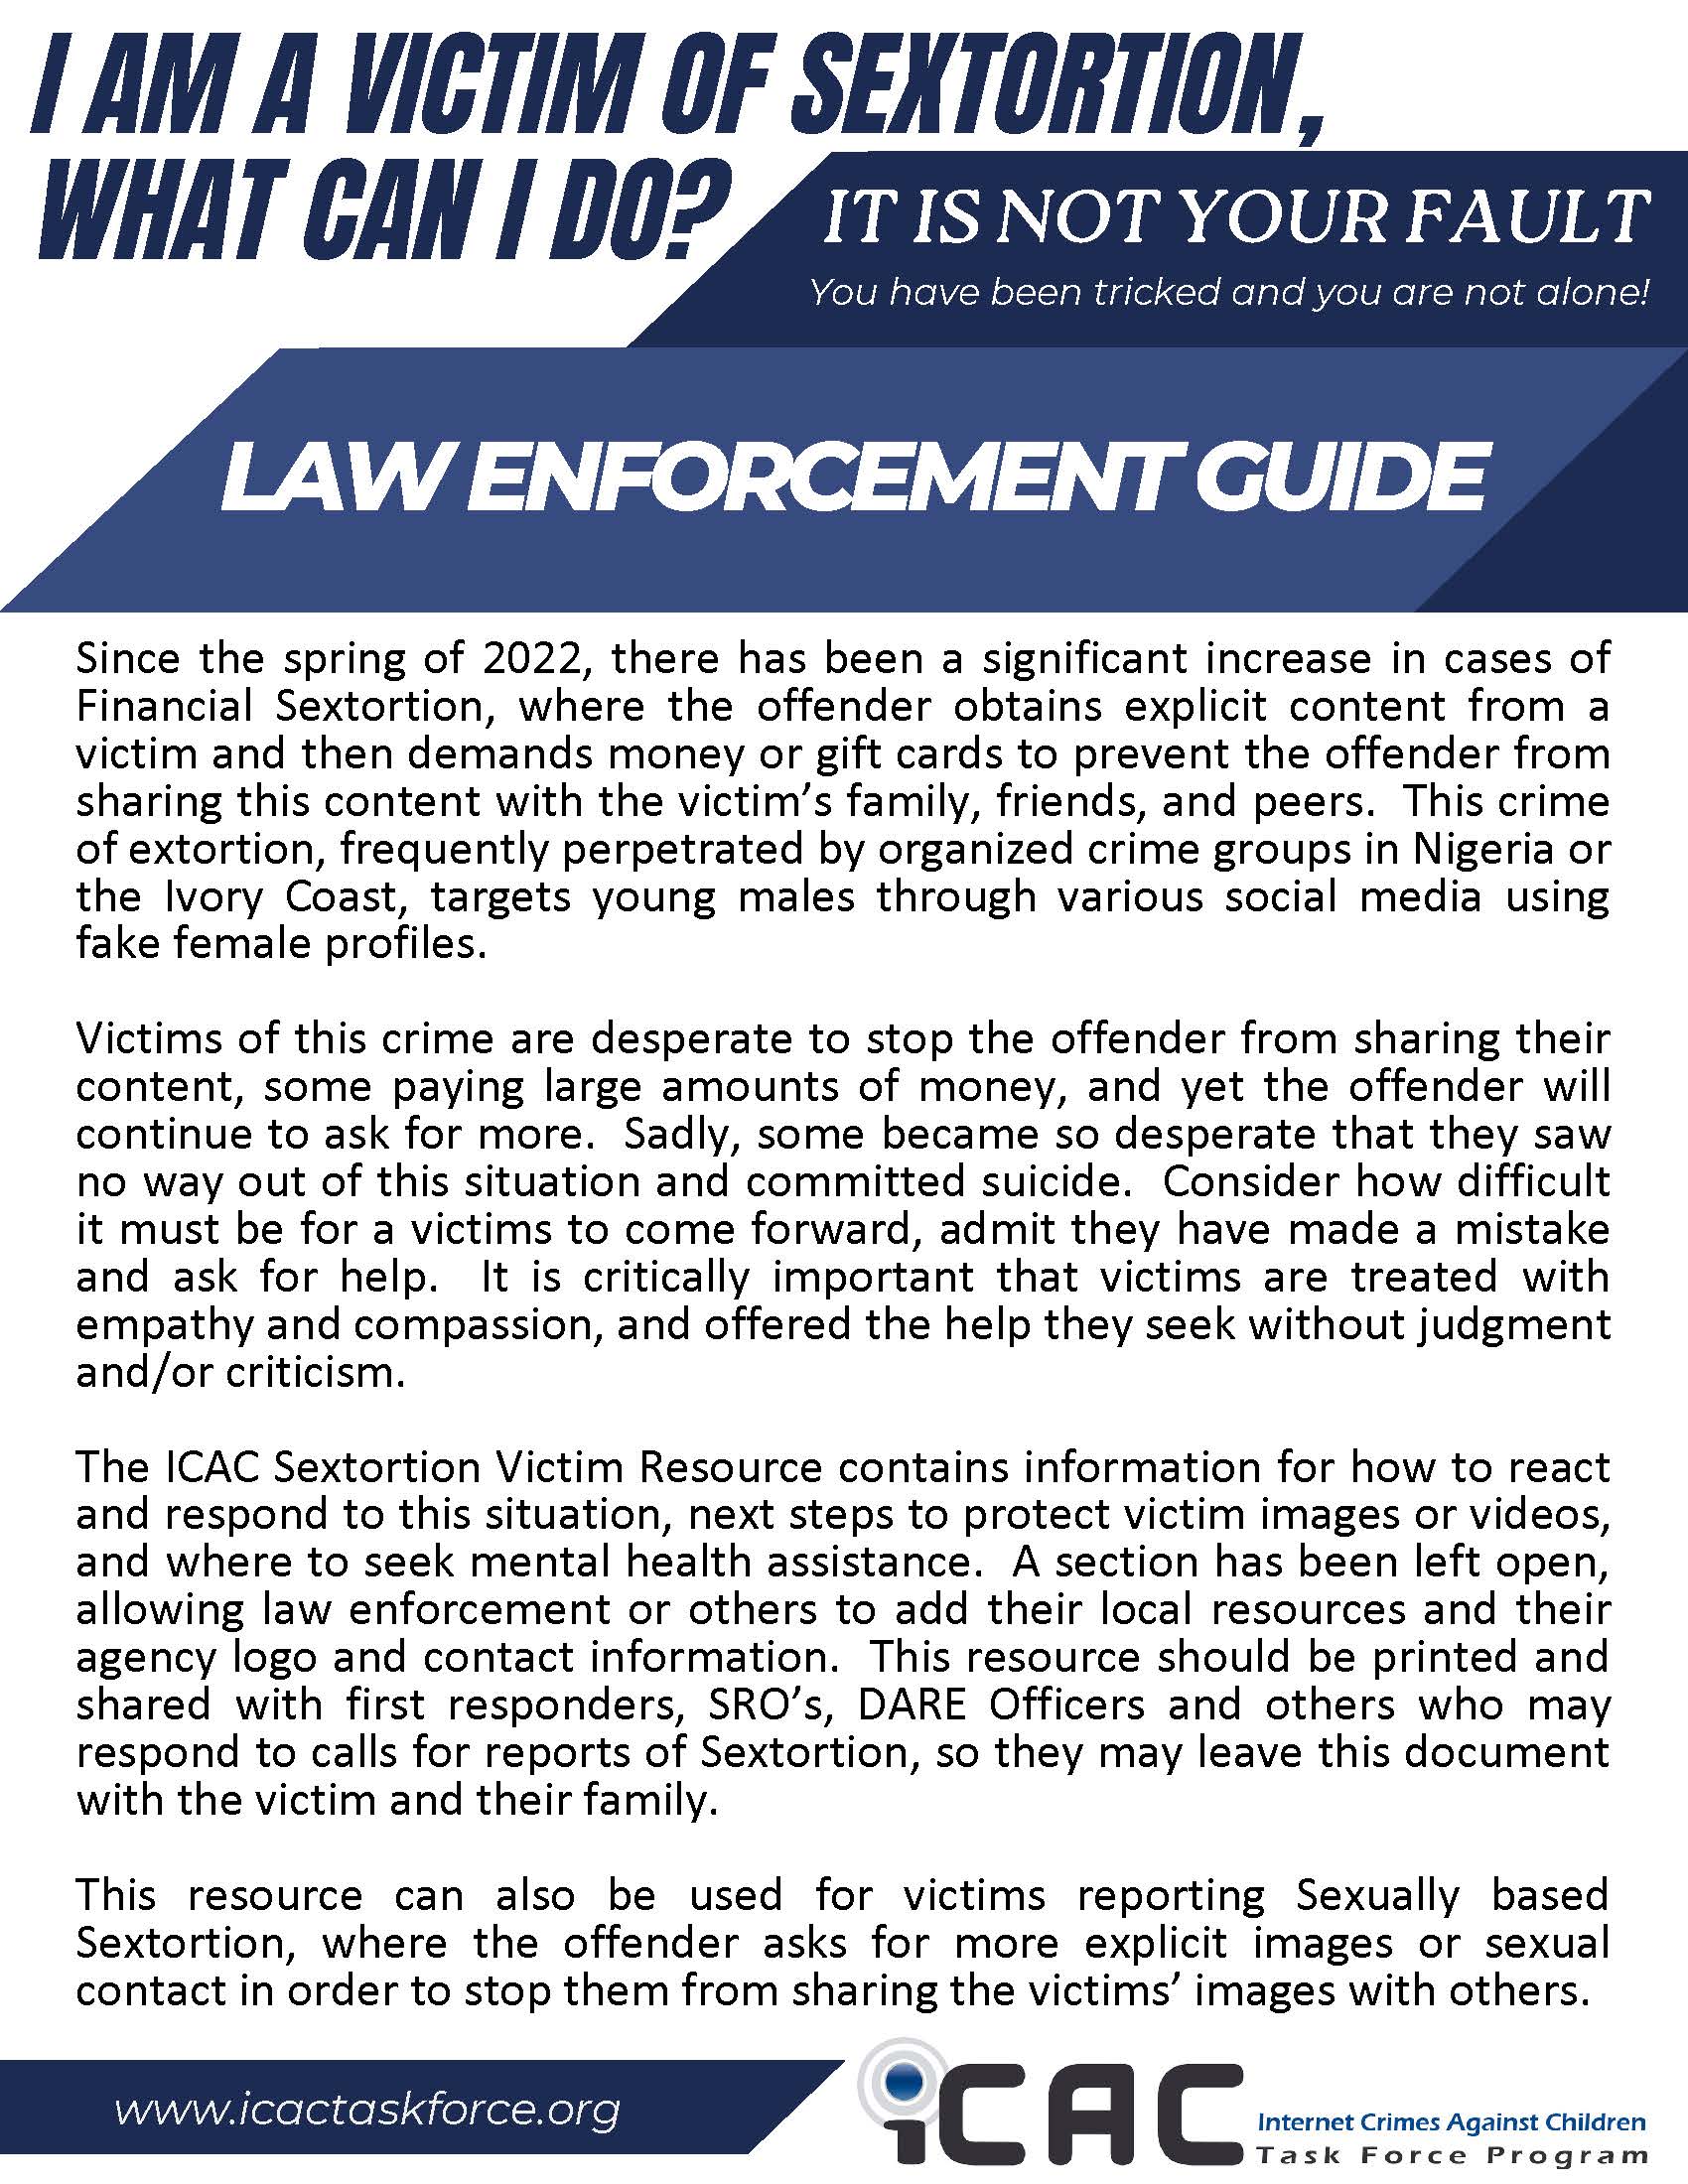 Law Enforcement Guide for Sextortion Victims